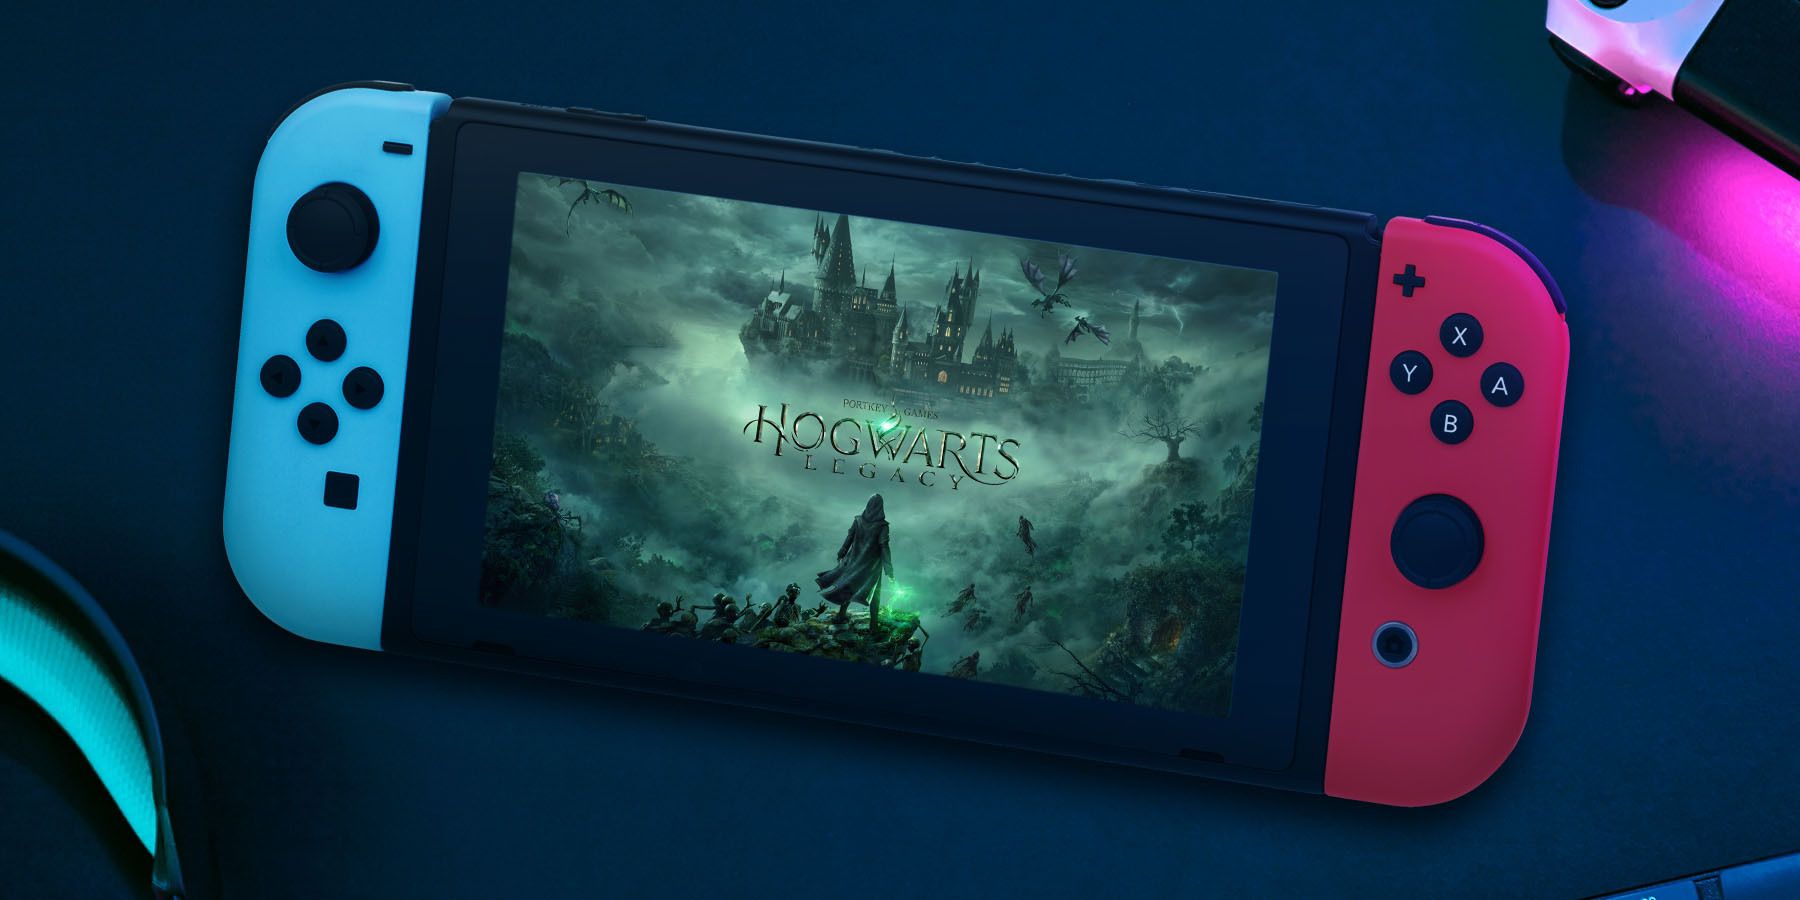 Hogwarts Legacy's Journey Doesn't Have to End With the Nintendo Switch